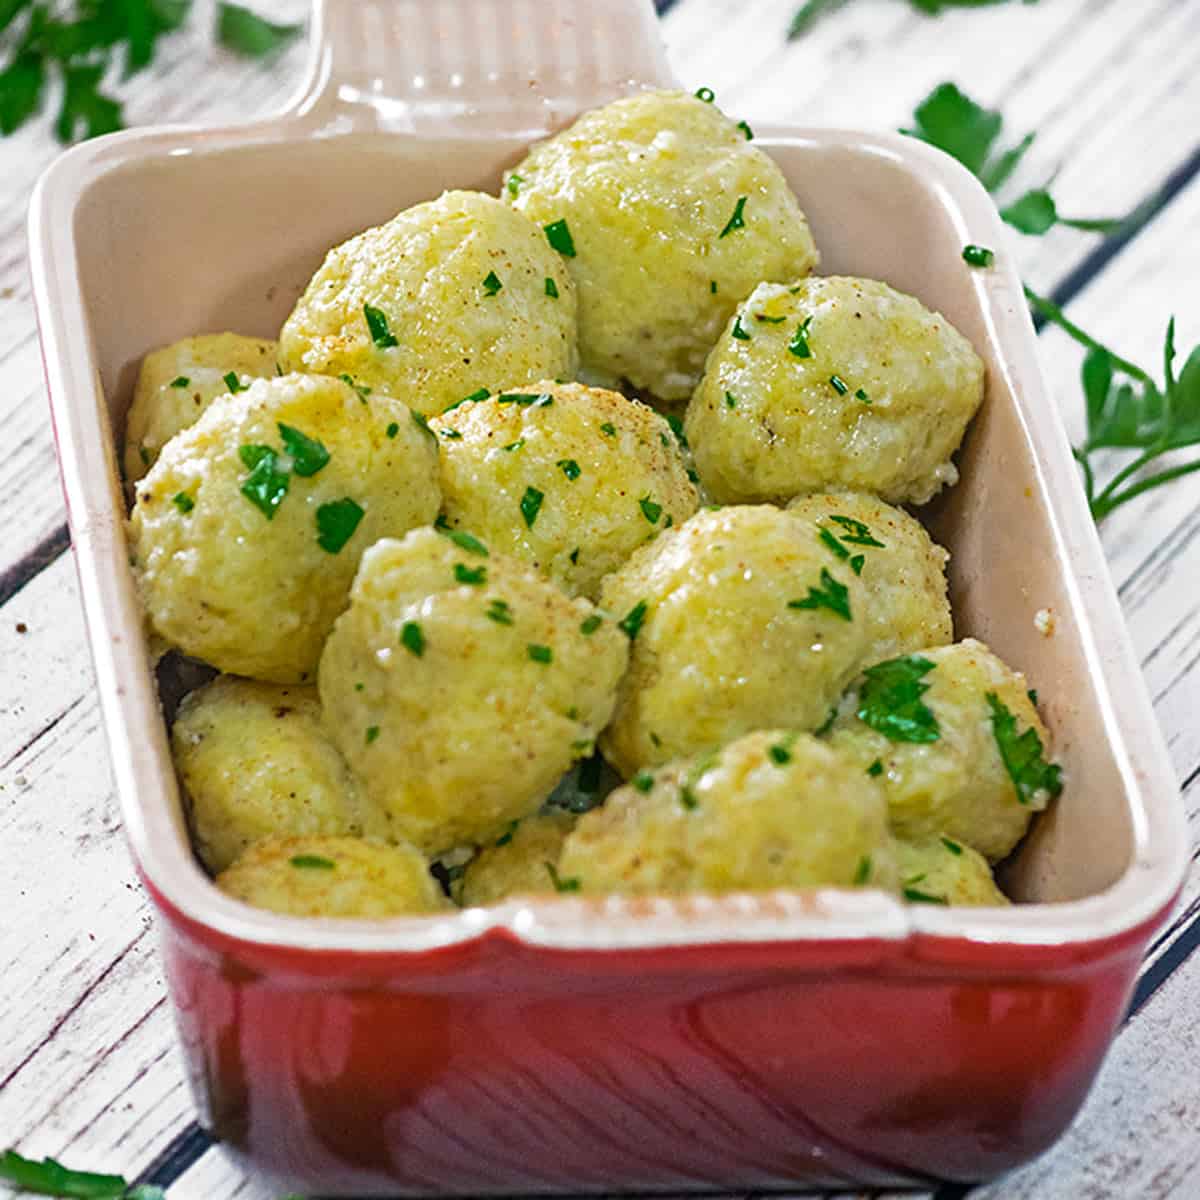 A pan of potato dumplings garnished with parsley.